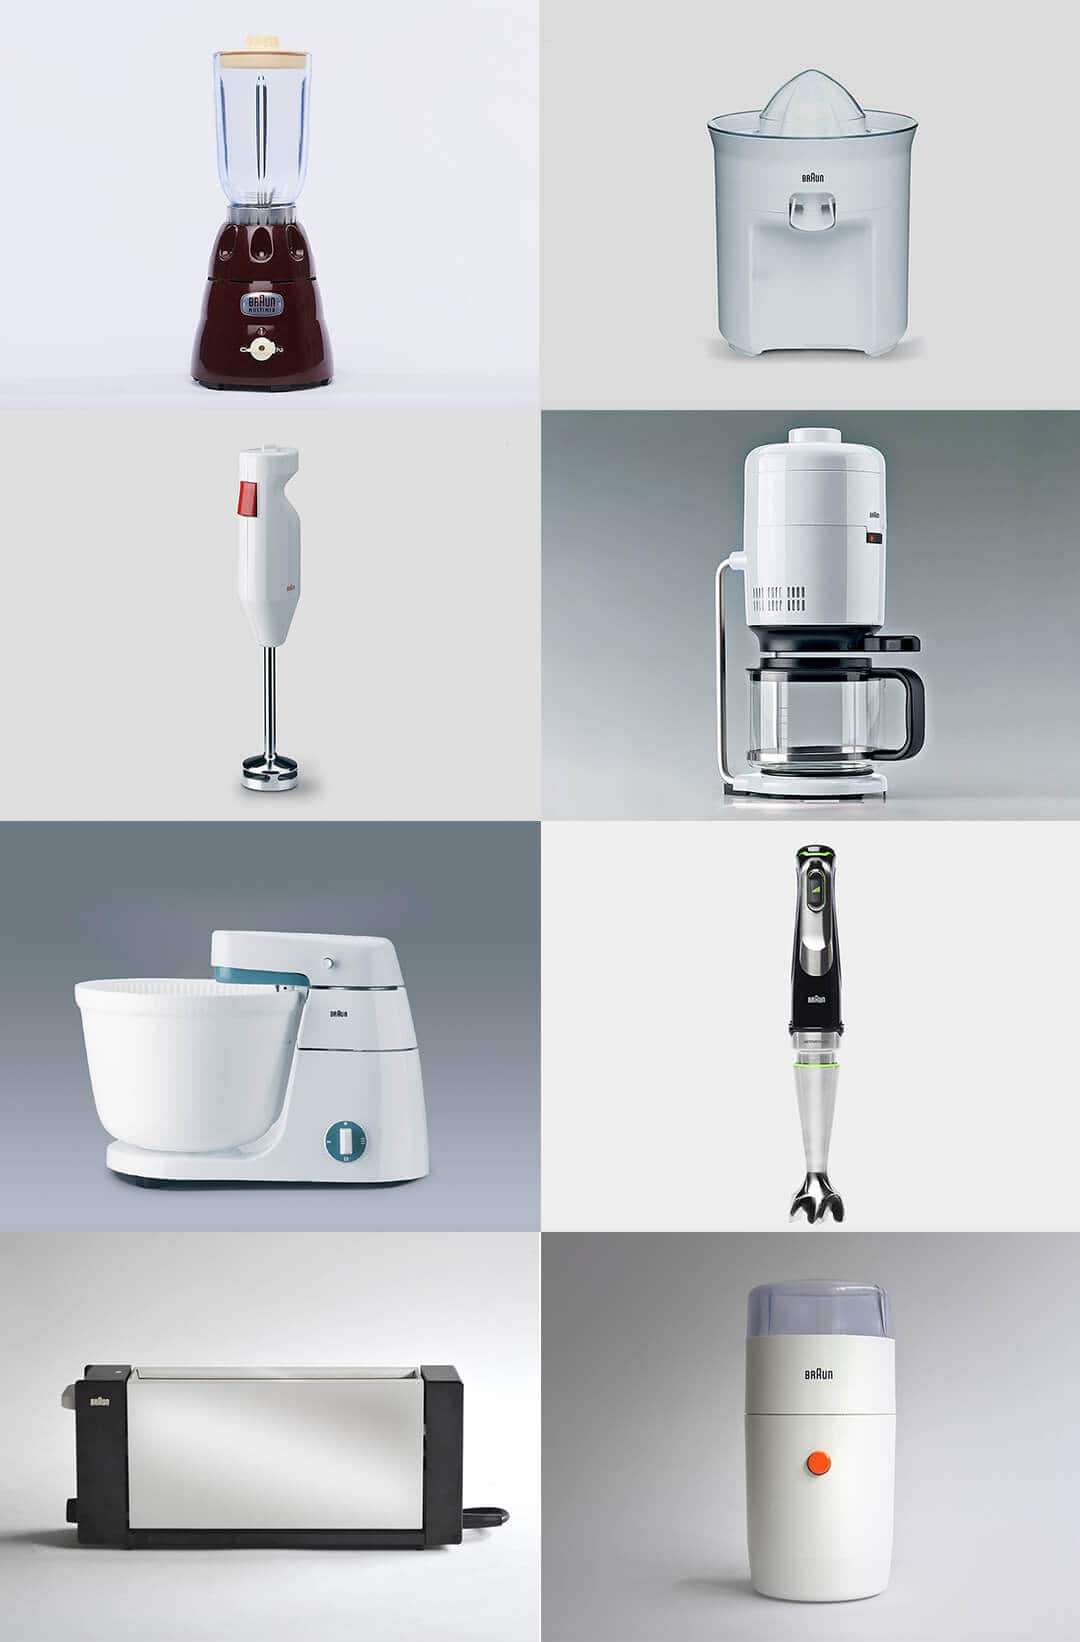 Braun. Design for what matters.